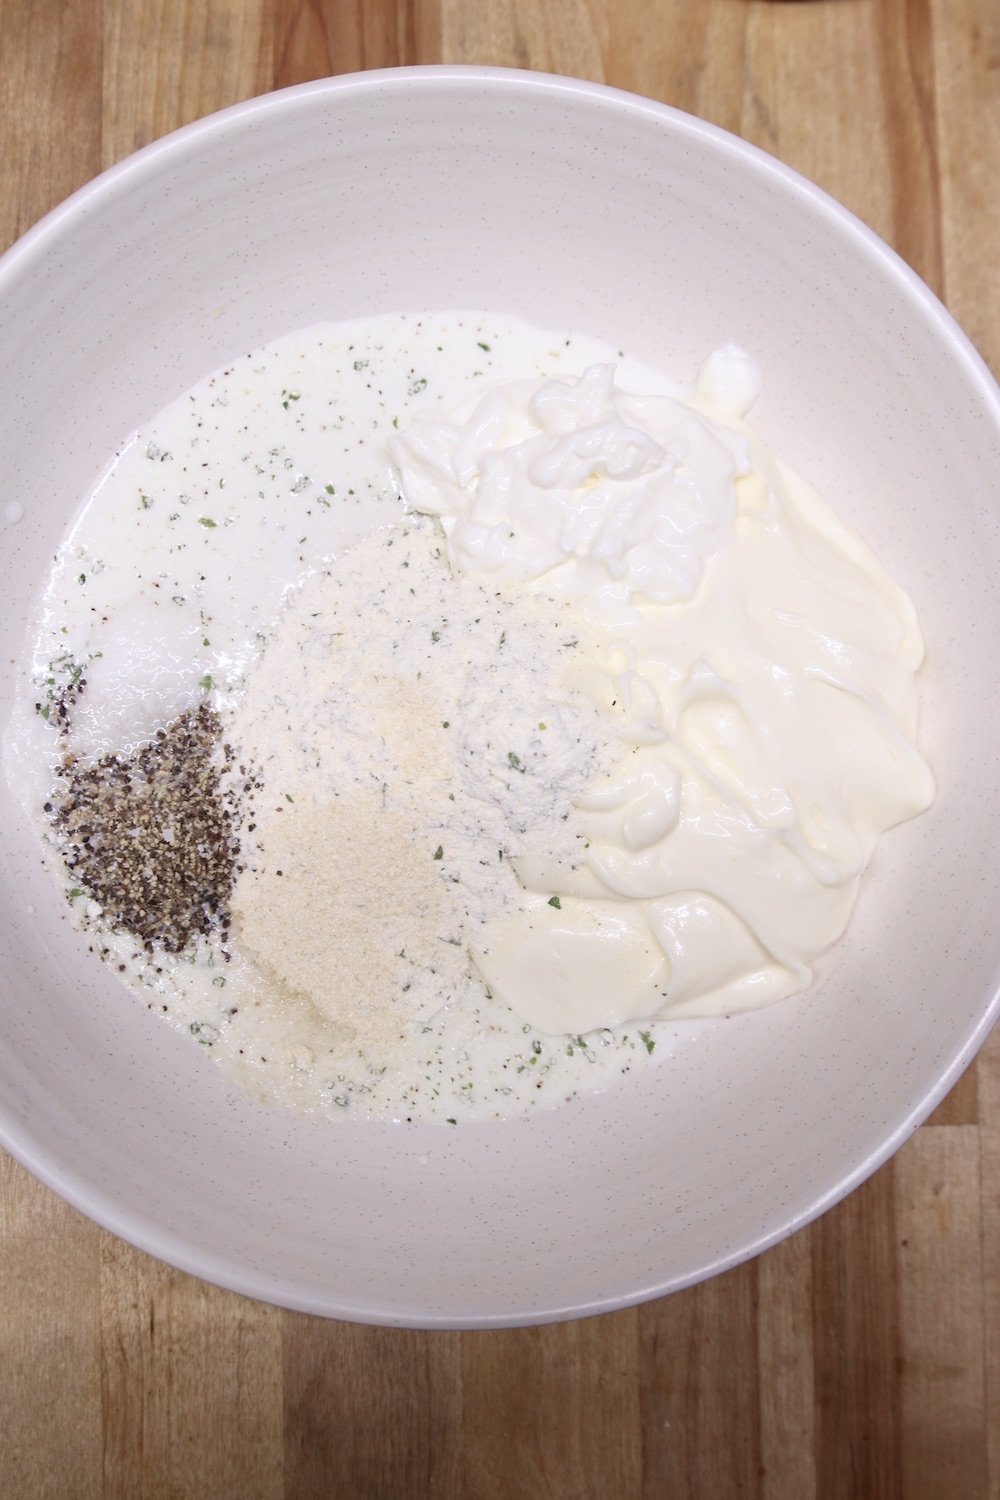 mayo, sour cream, seasonings for ranch salad dressing in abowo